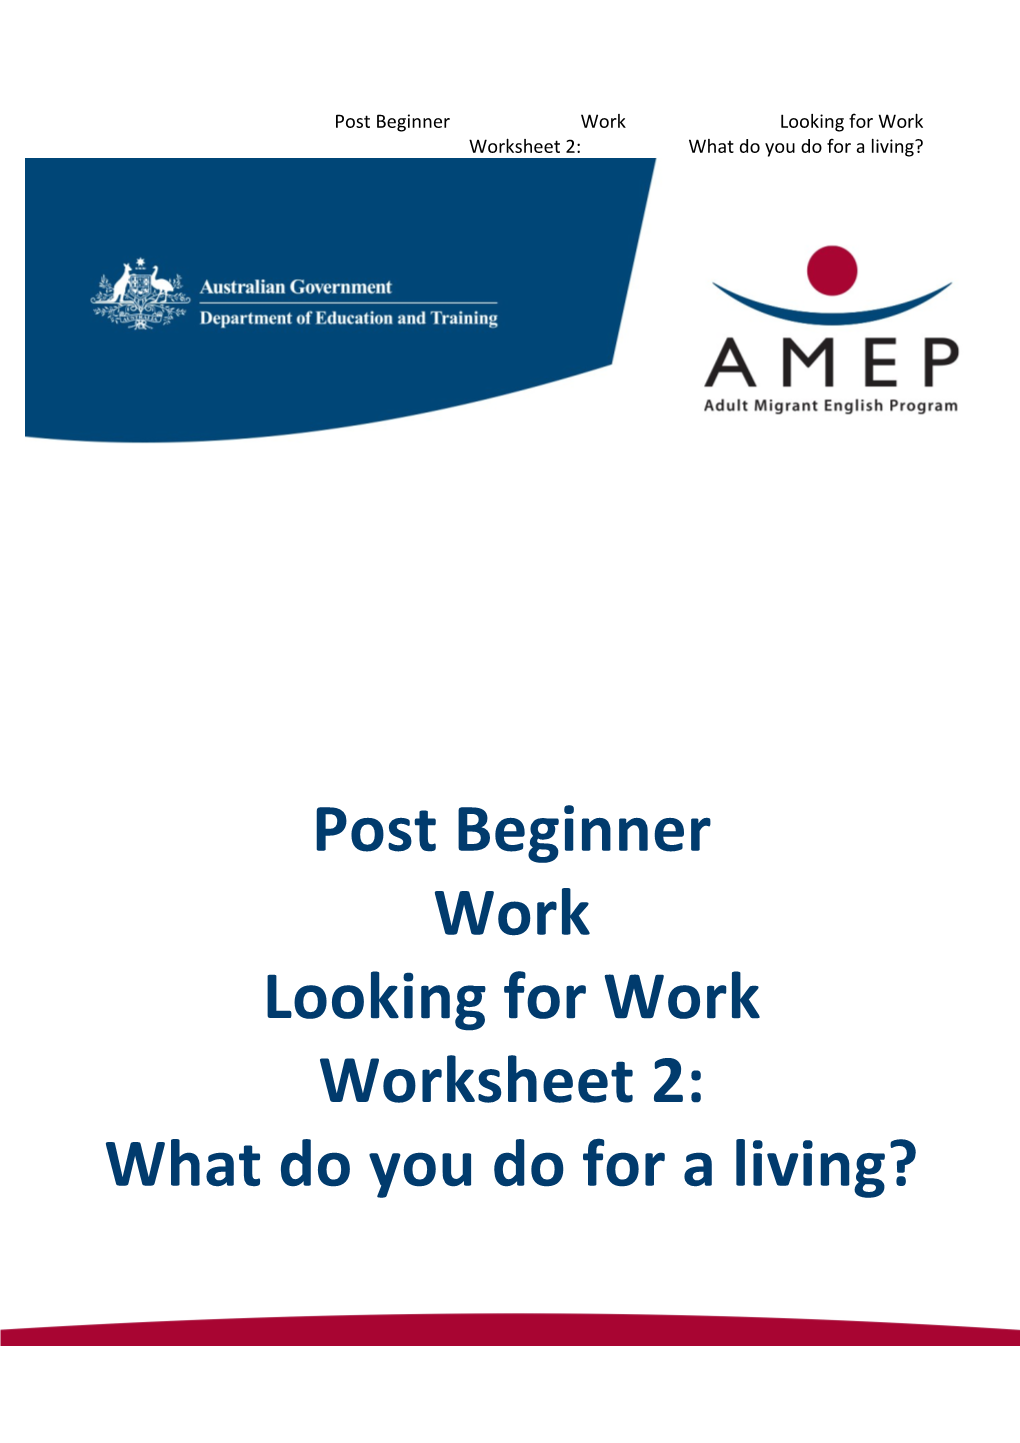 Post Beginner Work Looking for Work Worksheet 2: What Do You Do for a Living?